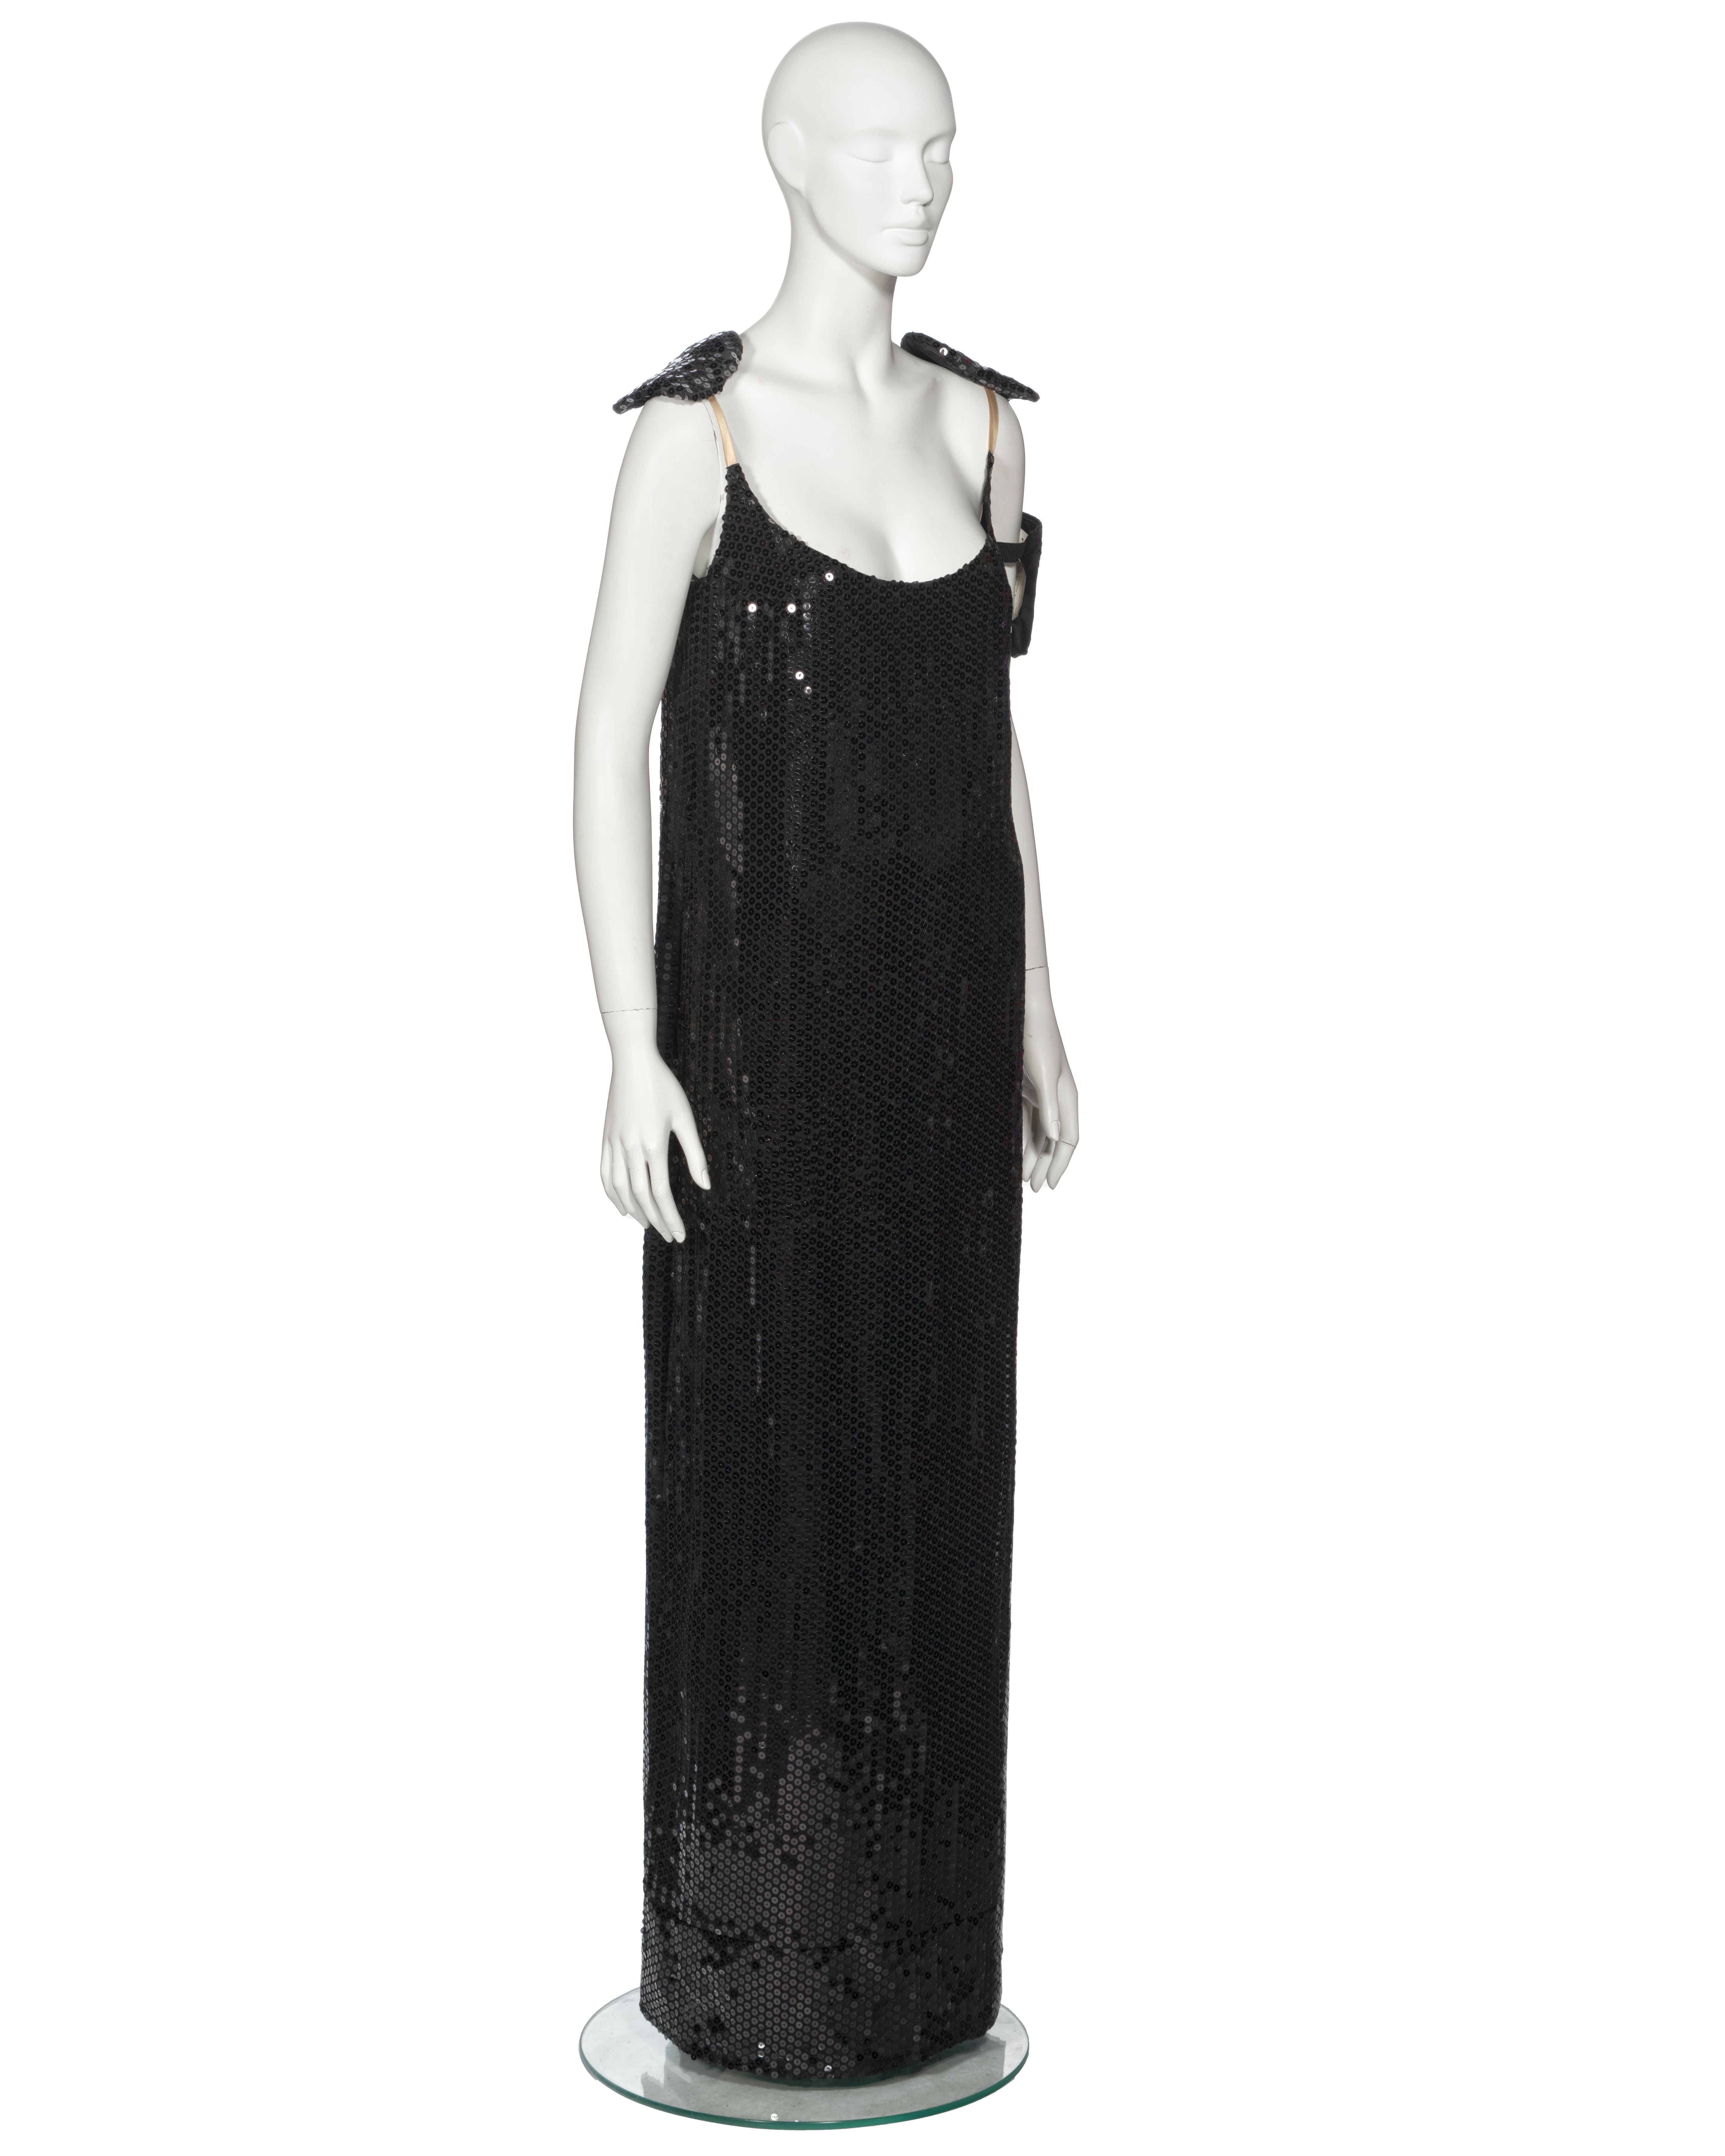 Helmut Lang Black Sequin Evening Dress With Armband, fw 1999 For Sale 2